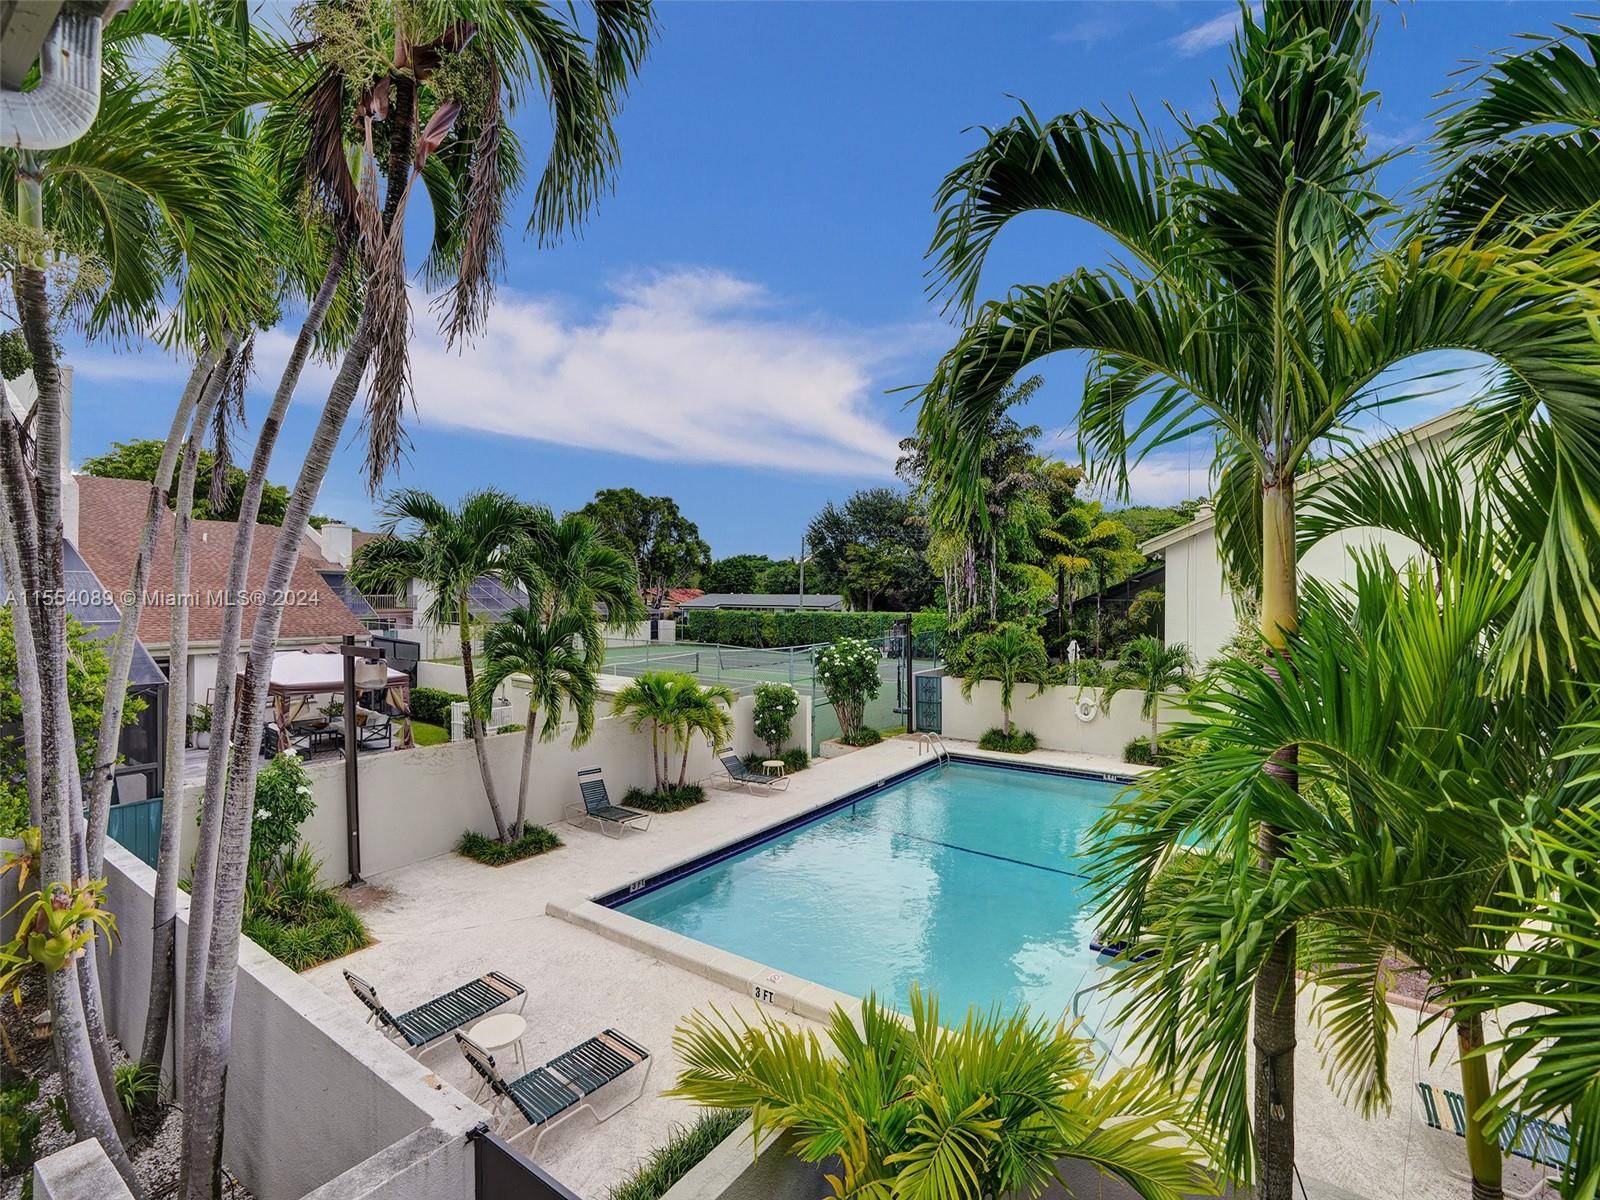 The Banyans of South Miami, one of the most prestigious best situated neighborhoods you can call home.